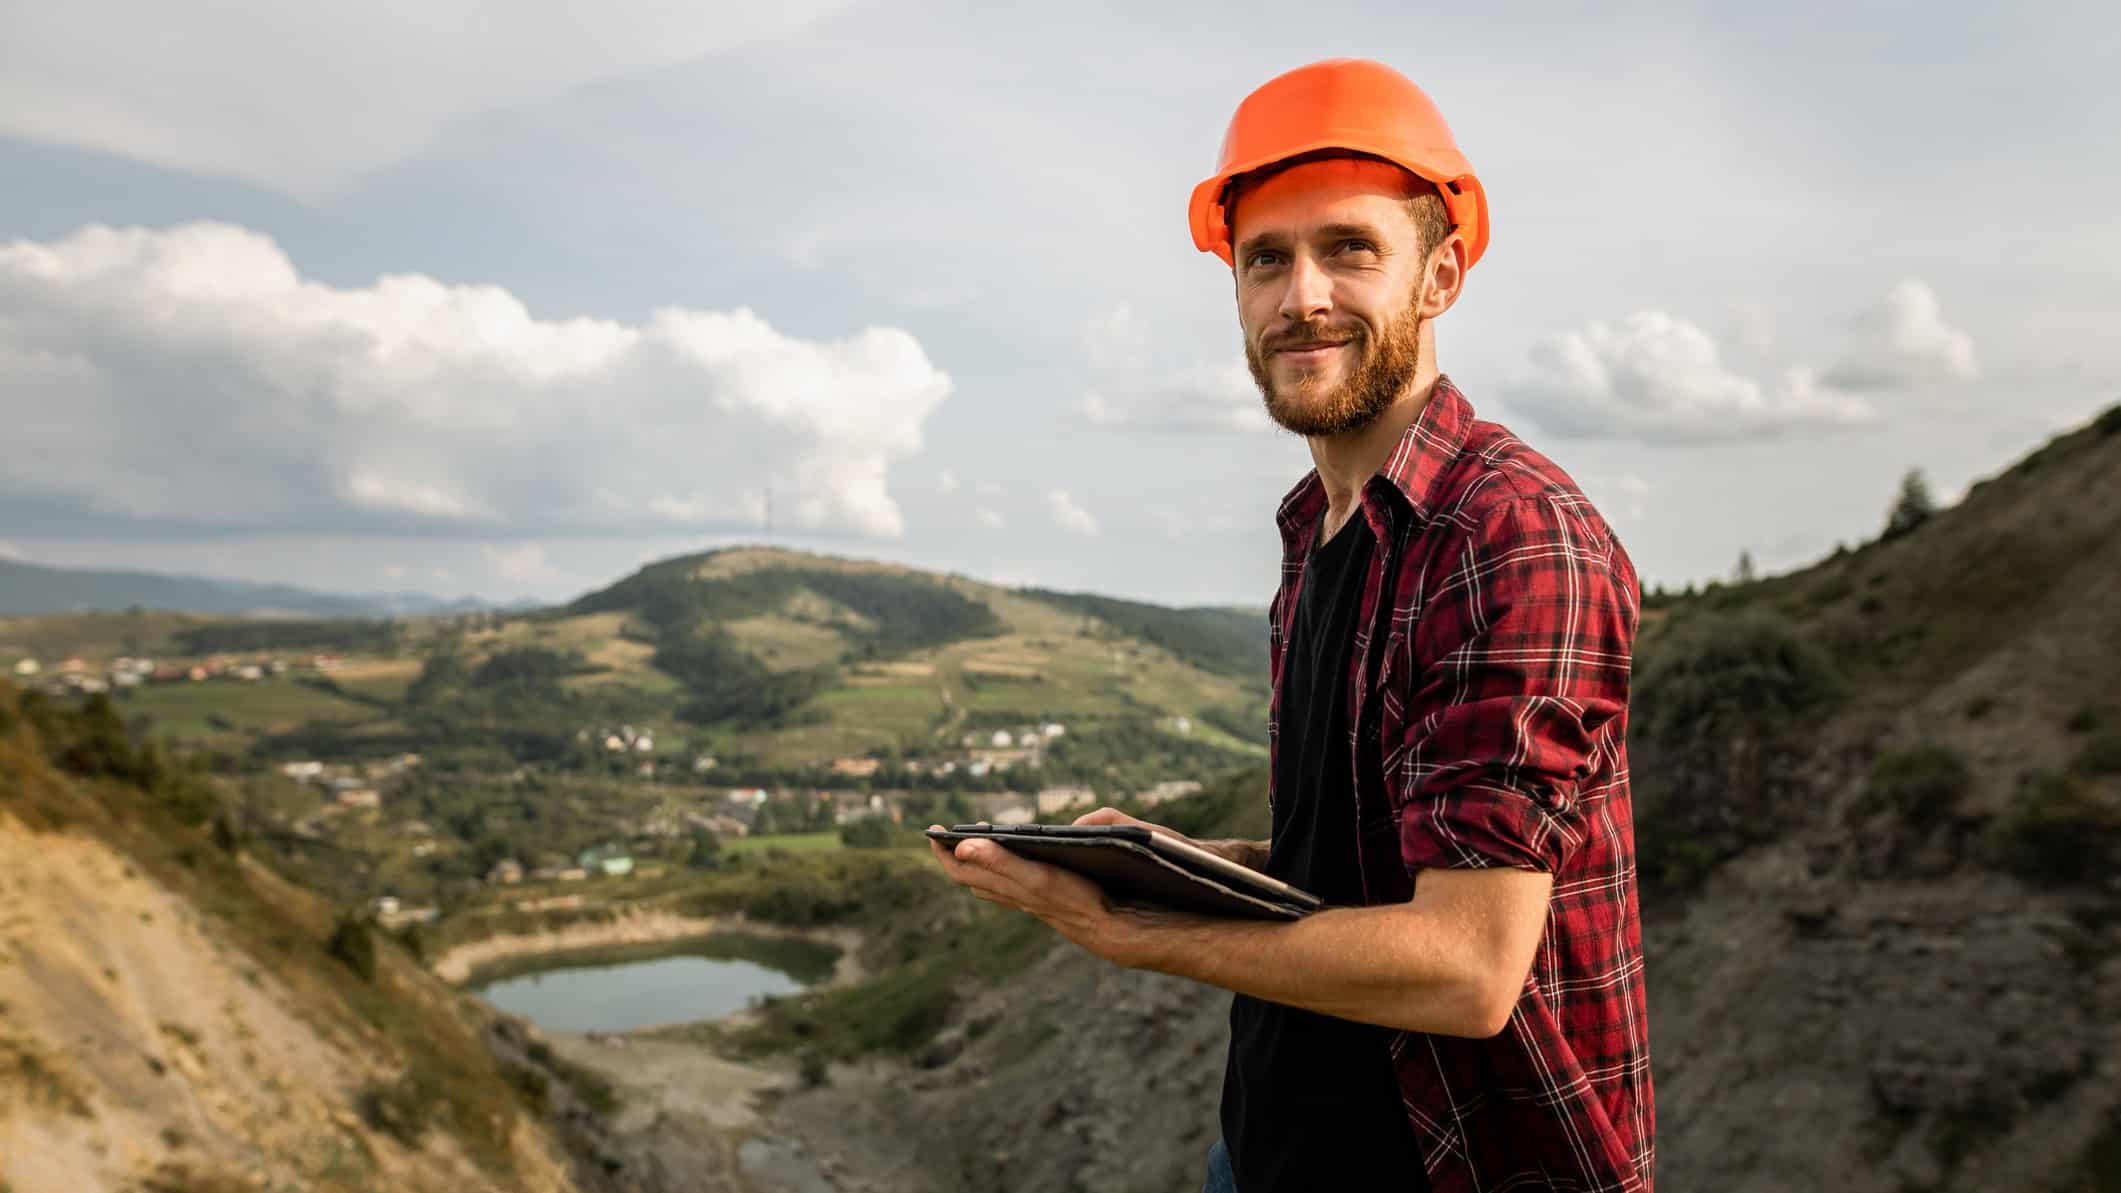 A miner in a hardhat makes a sale on his tablet in the field.